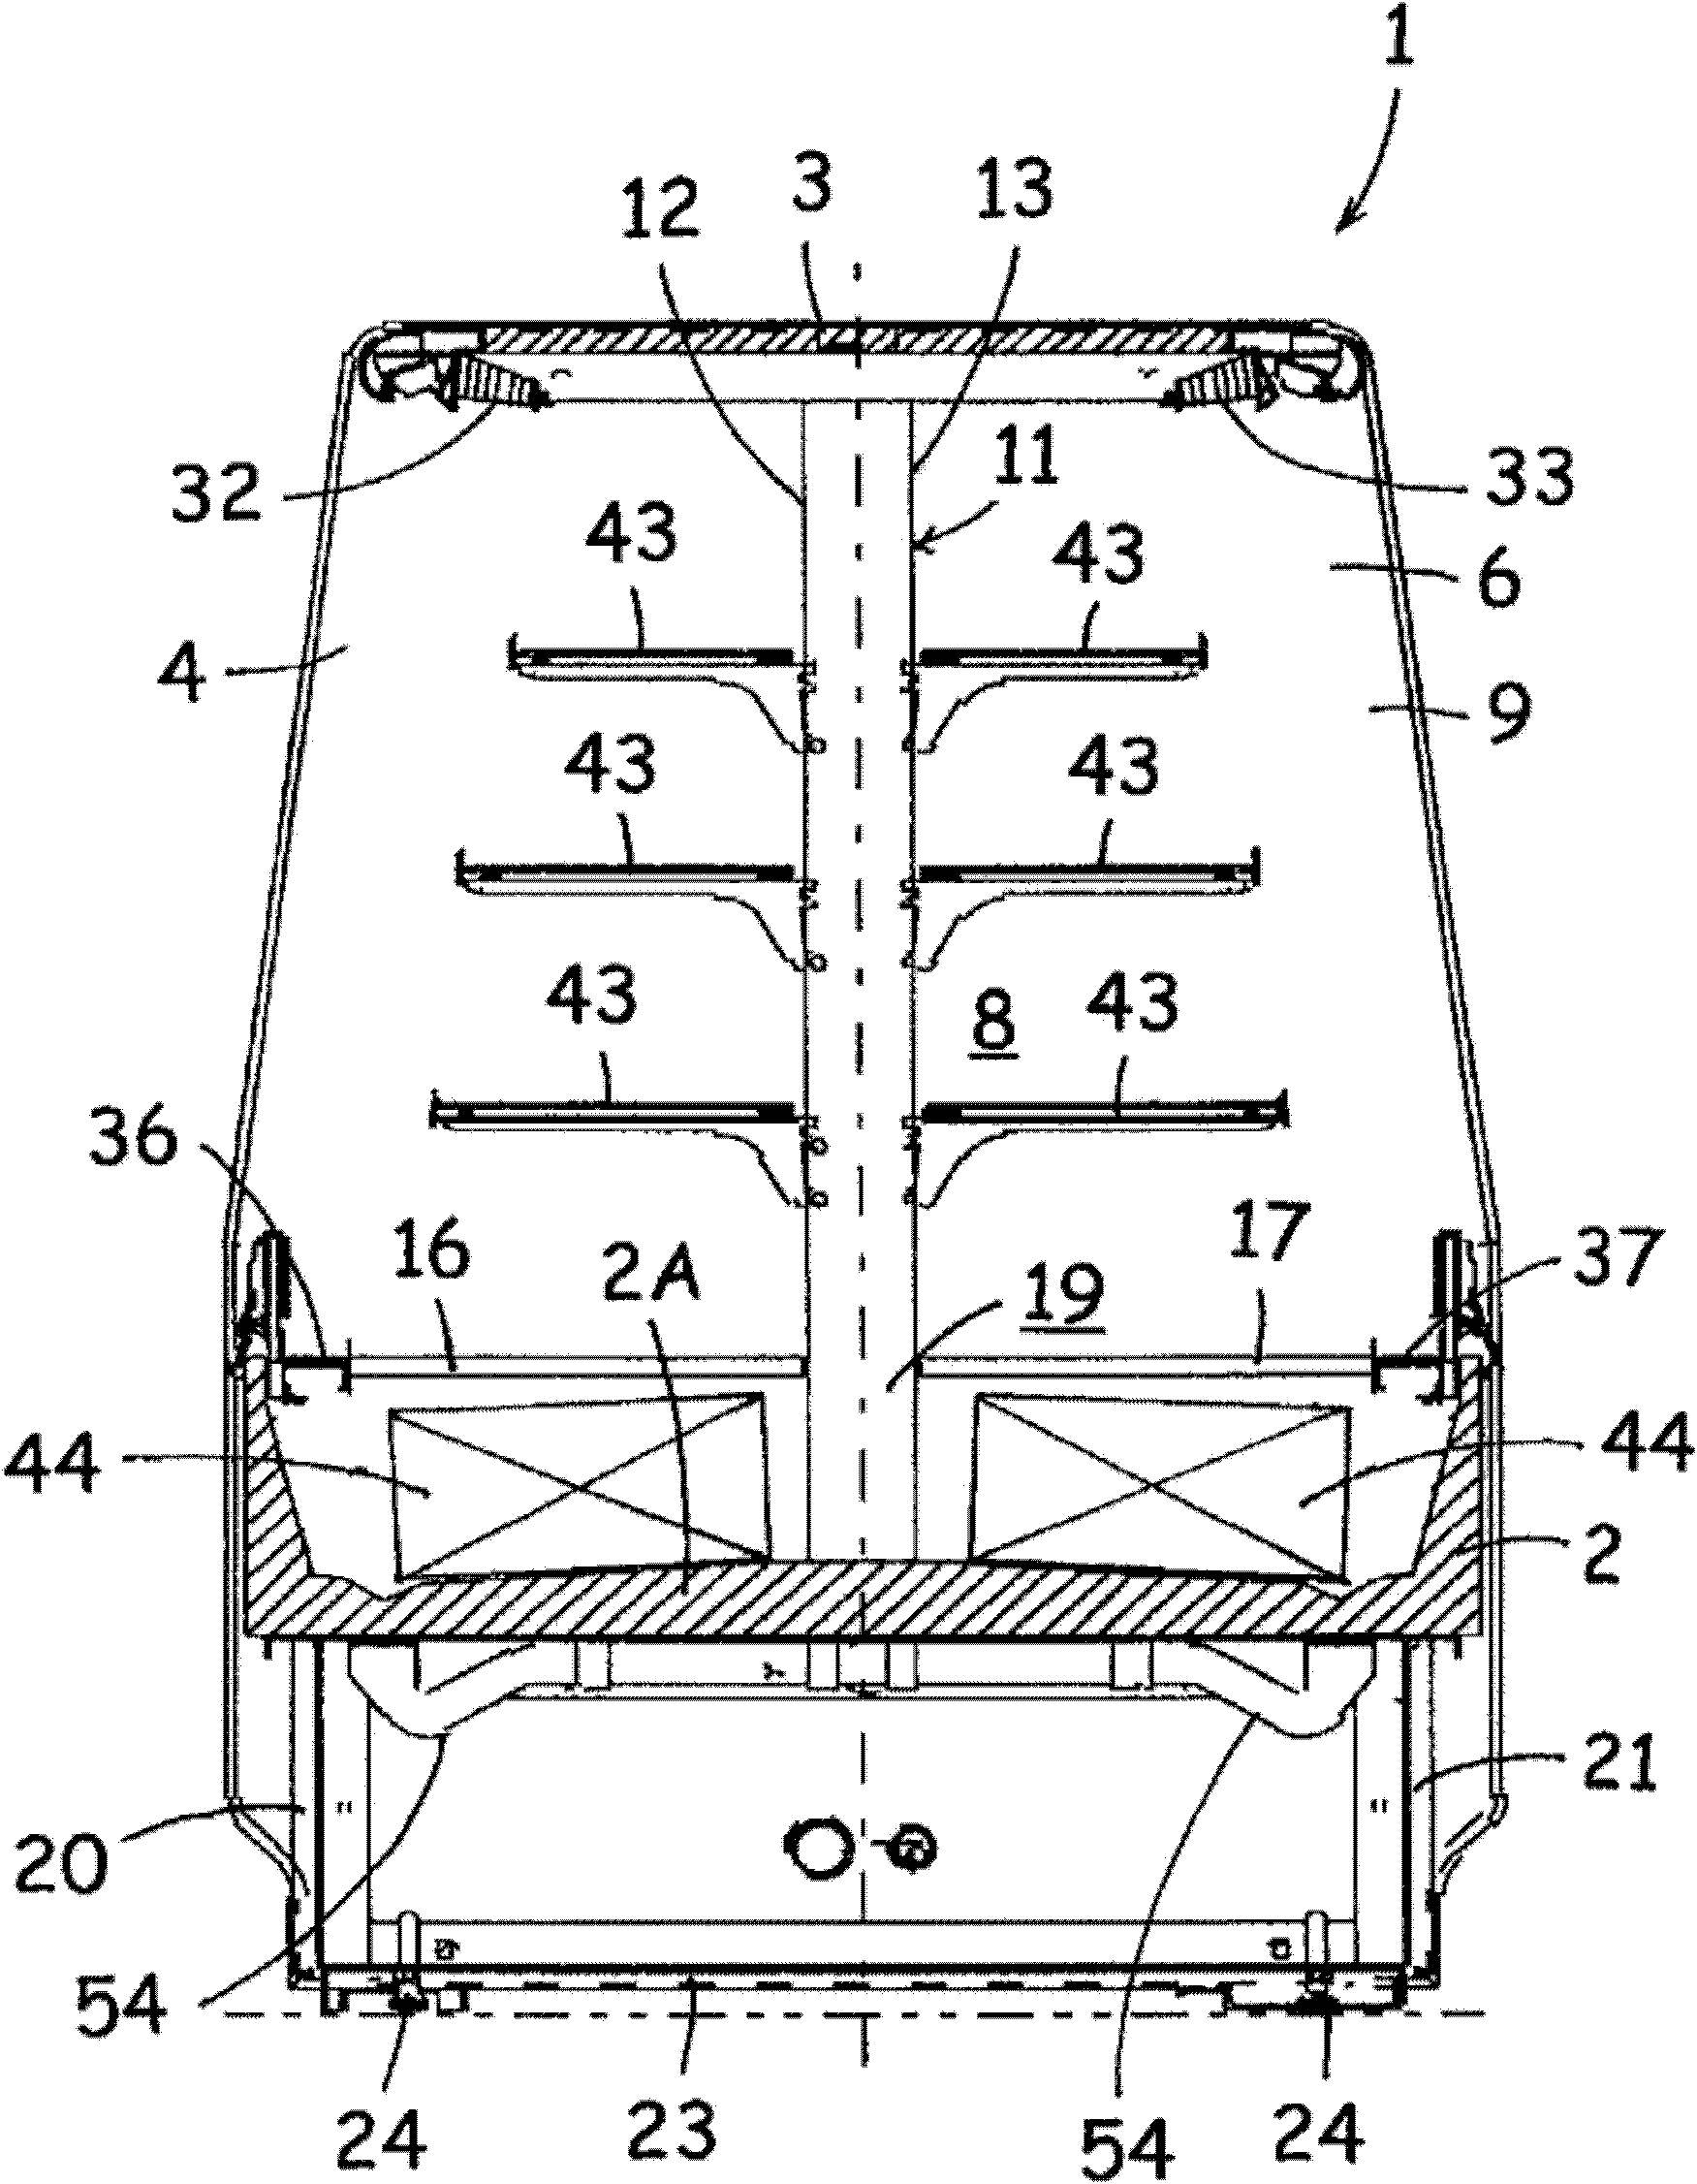 Condensed water evaporating apparatus of cooling device